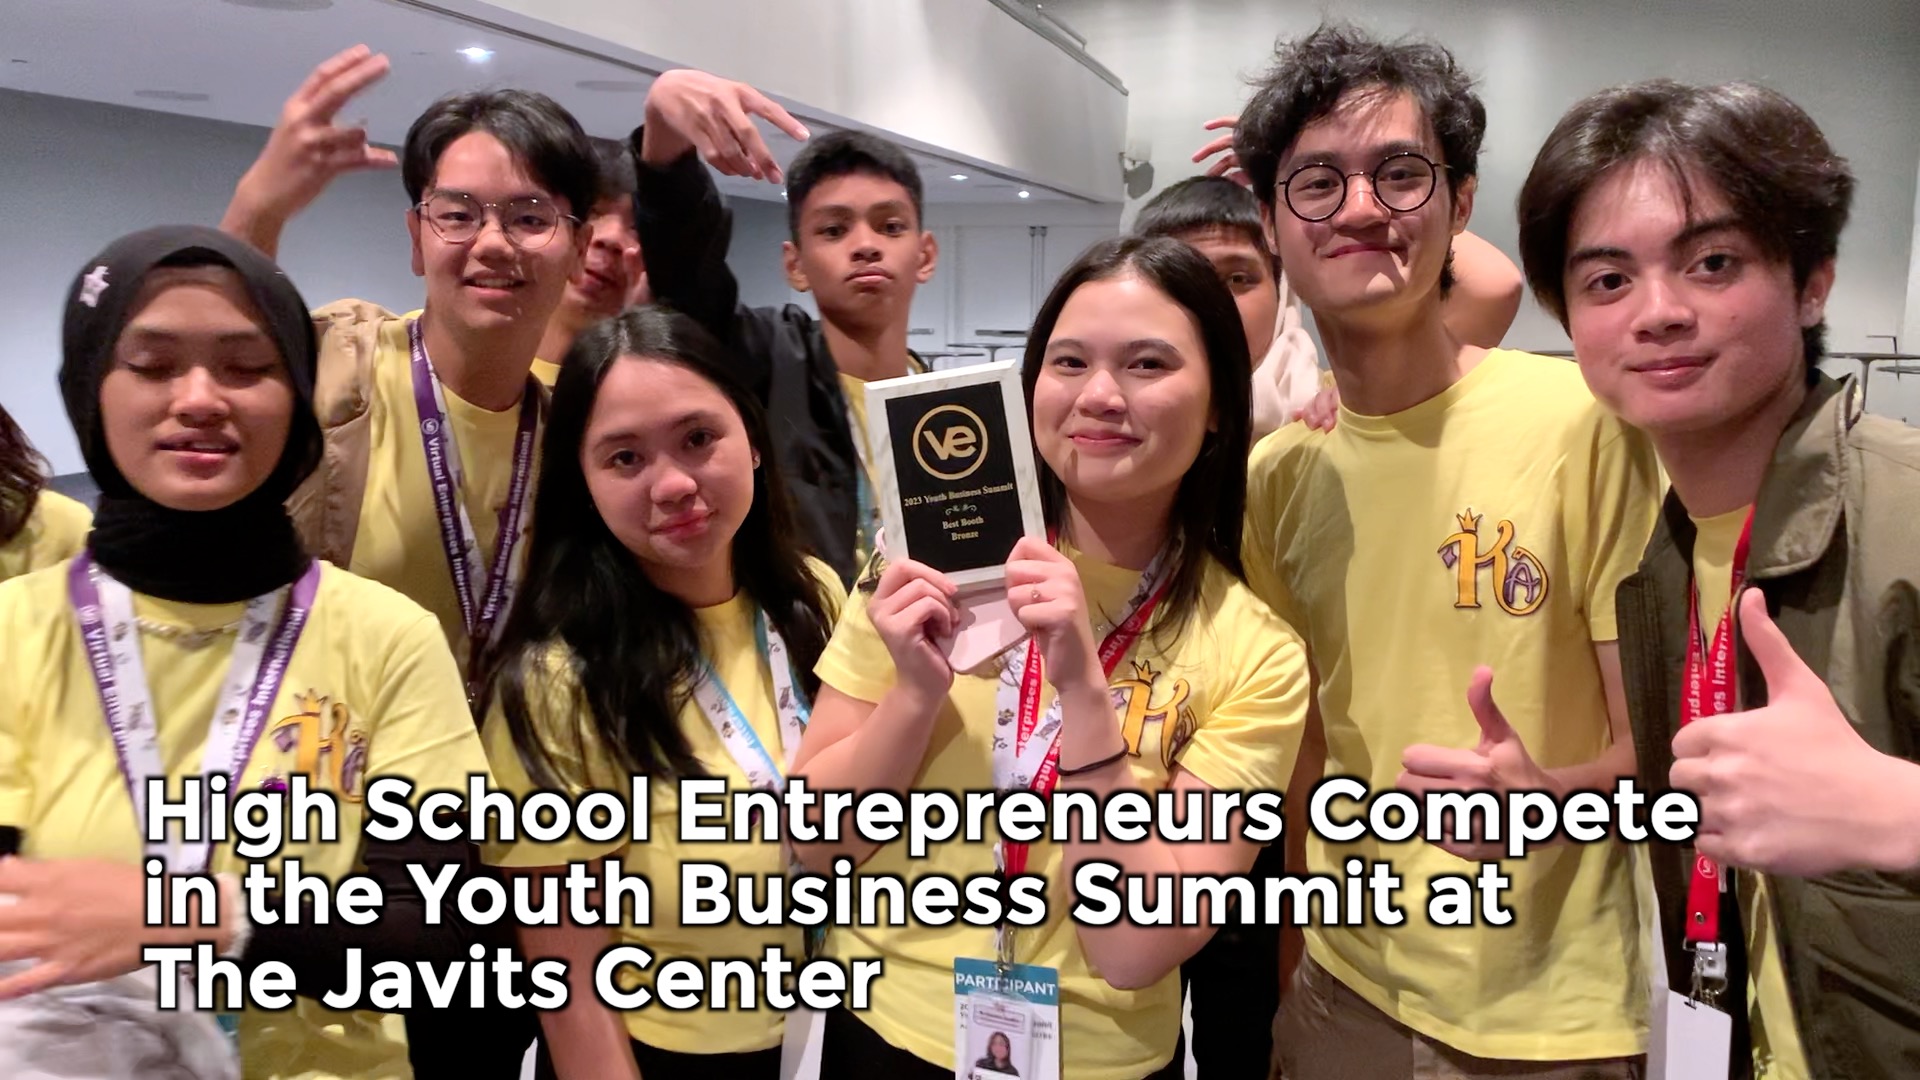 High School Entrepreneurs Compete in the Youth Business Summit at the Javits Center